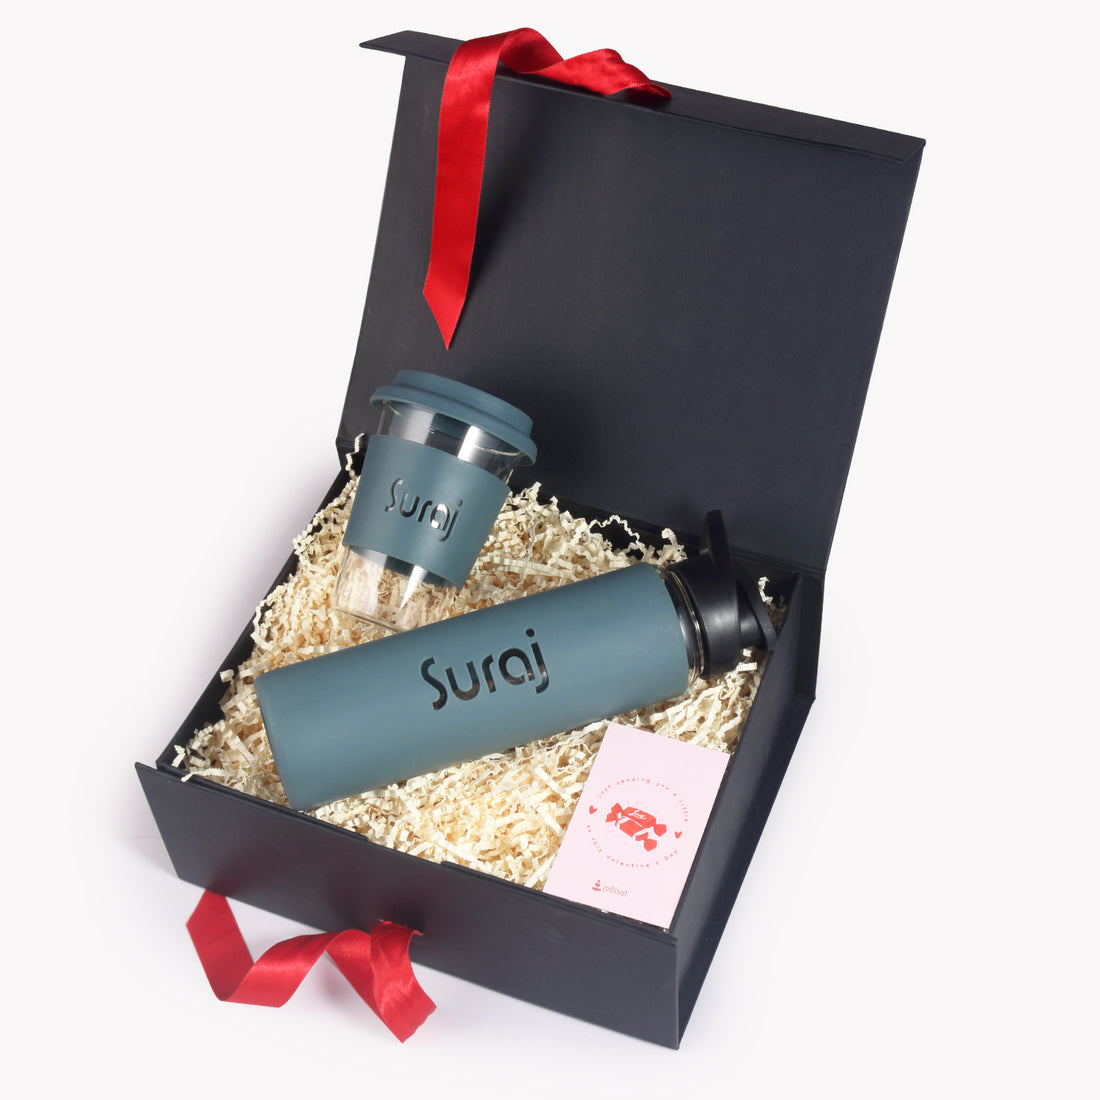 6 Brands That Will Help You With Custom Wedding Gift Hampers - HELLO! India